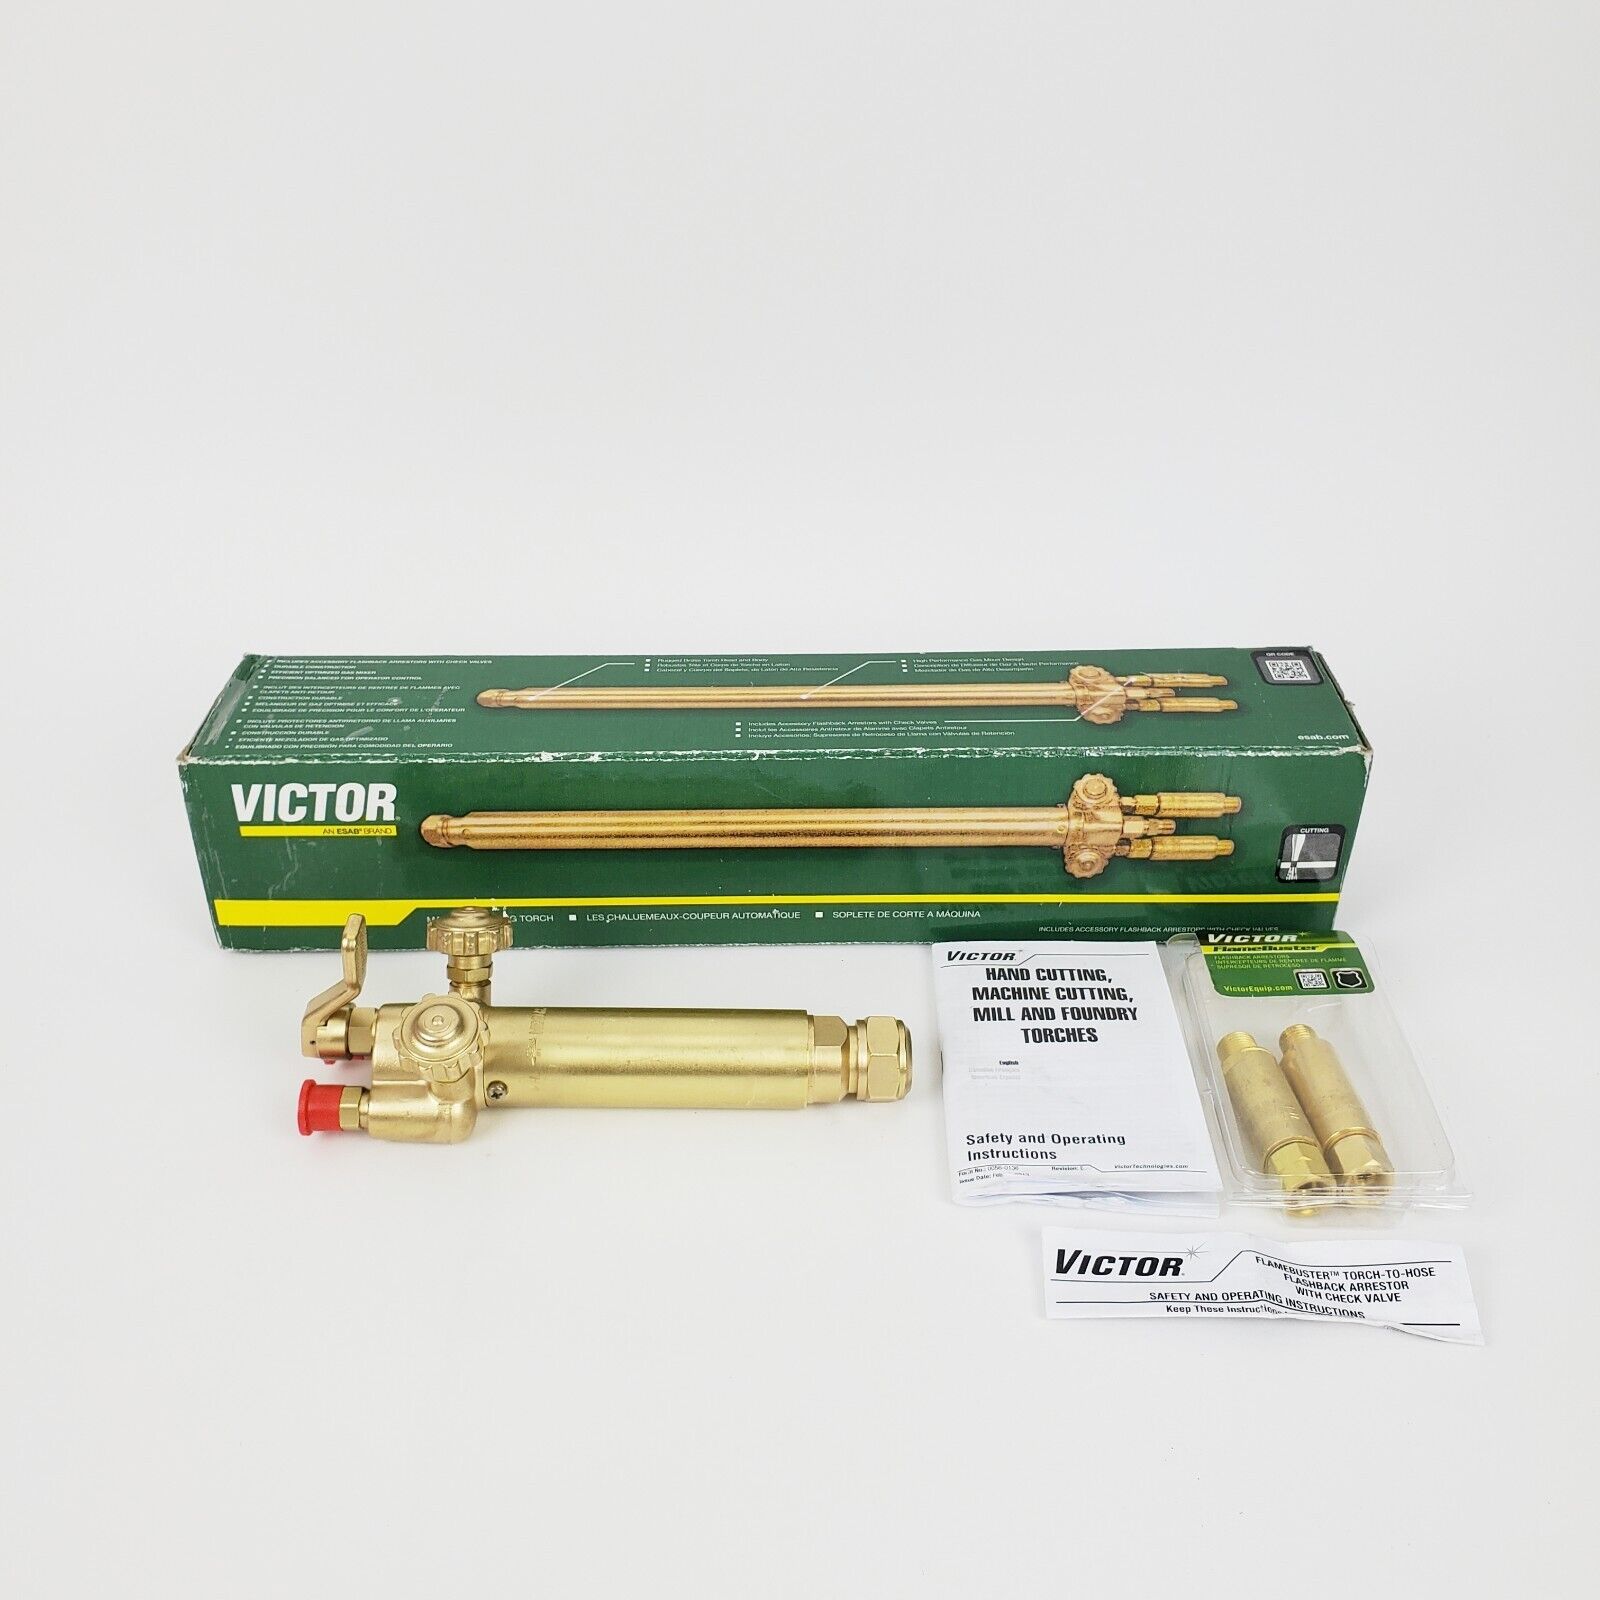 Victor 0380-0215 Two Hose Machine Torch MT204A, New